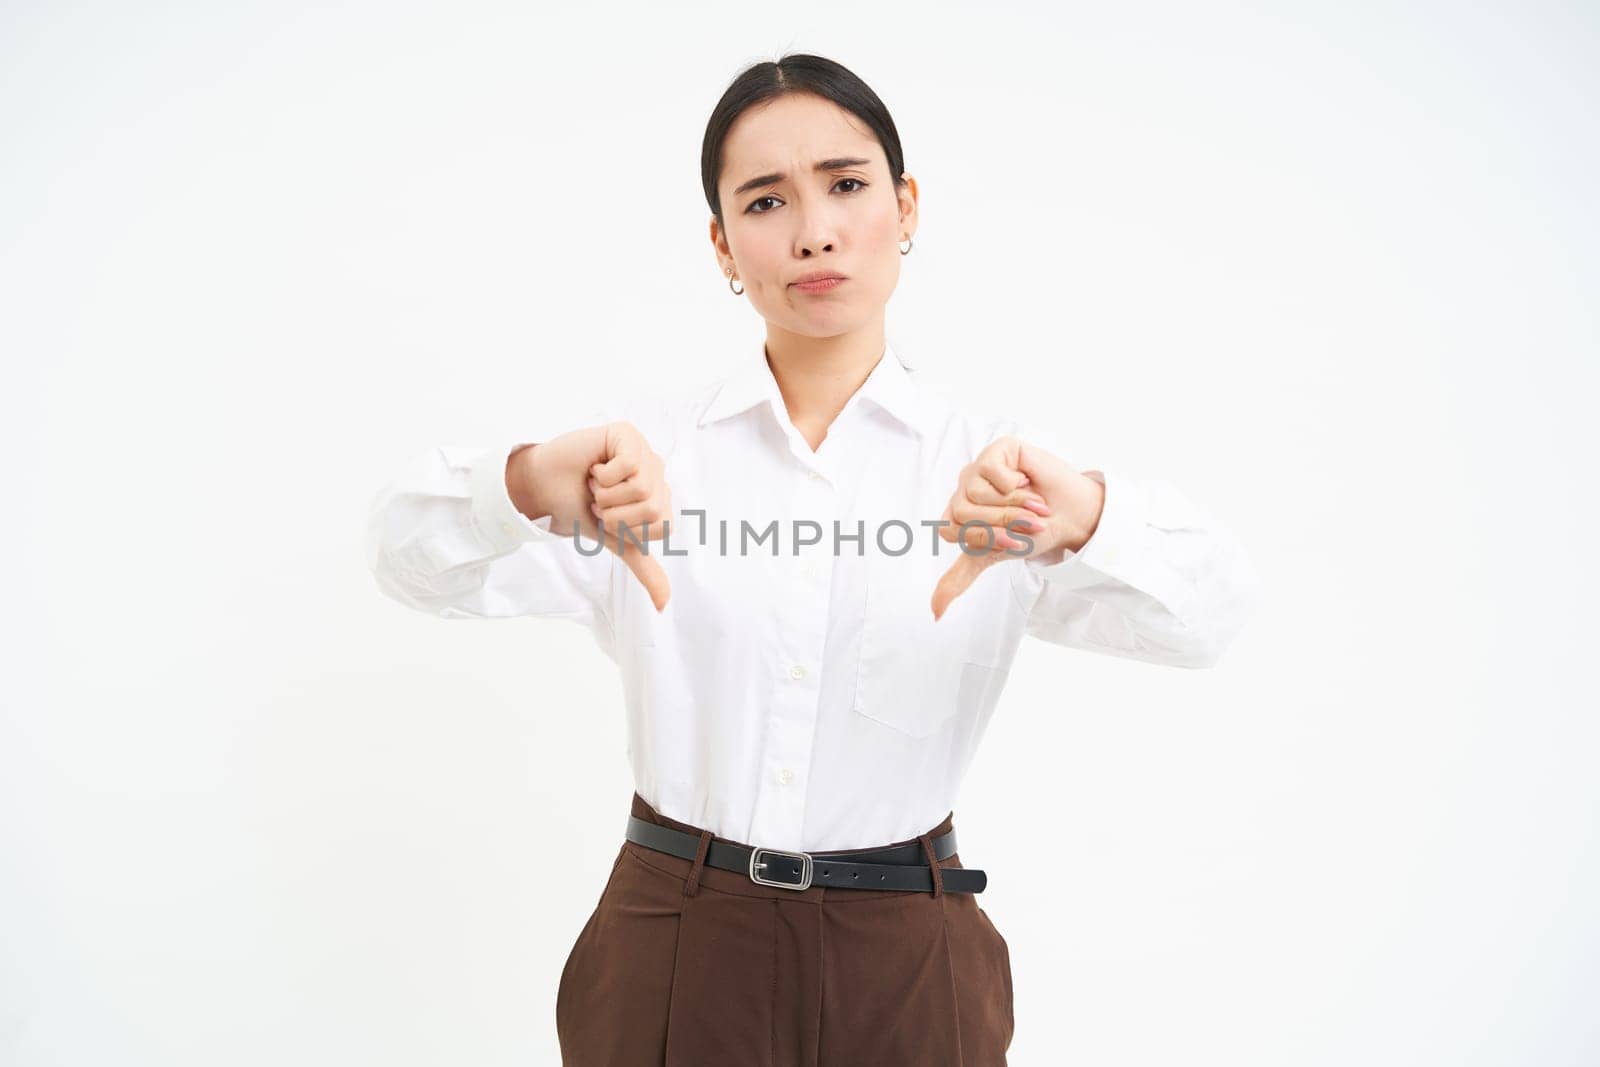 Image of disappointed woman, manager shows thumbs down and frowns with disapproval, white background.